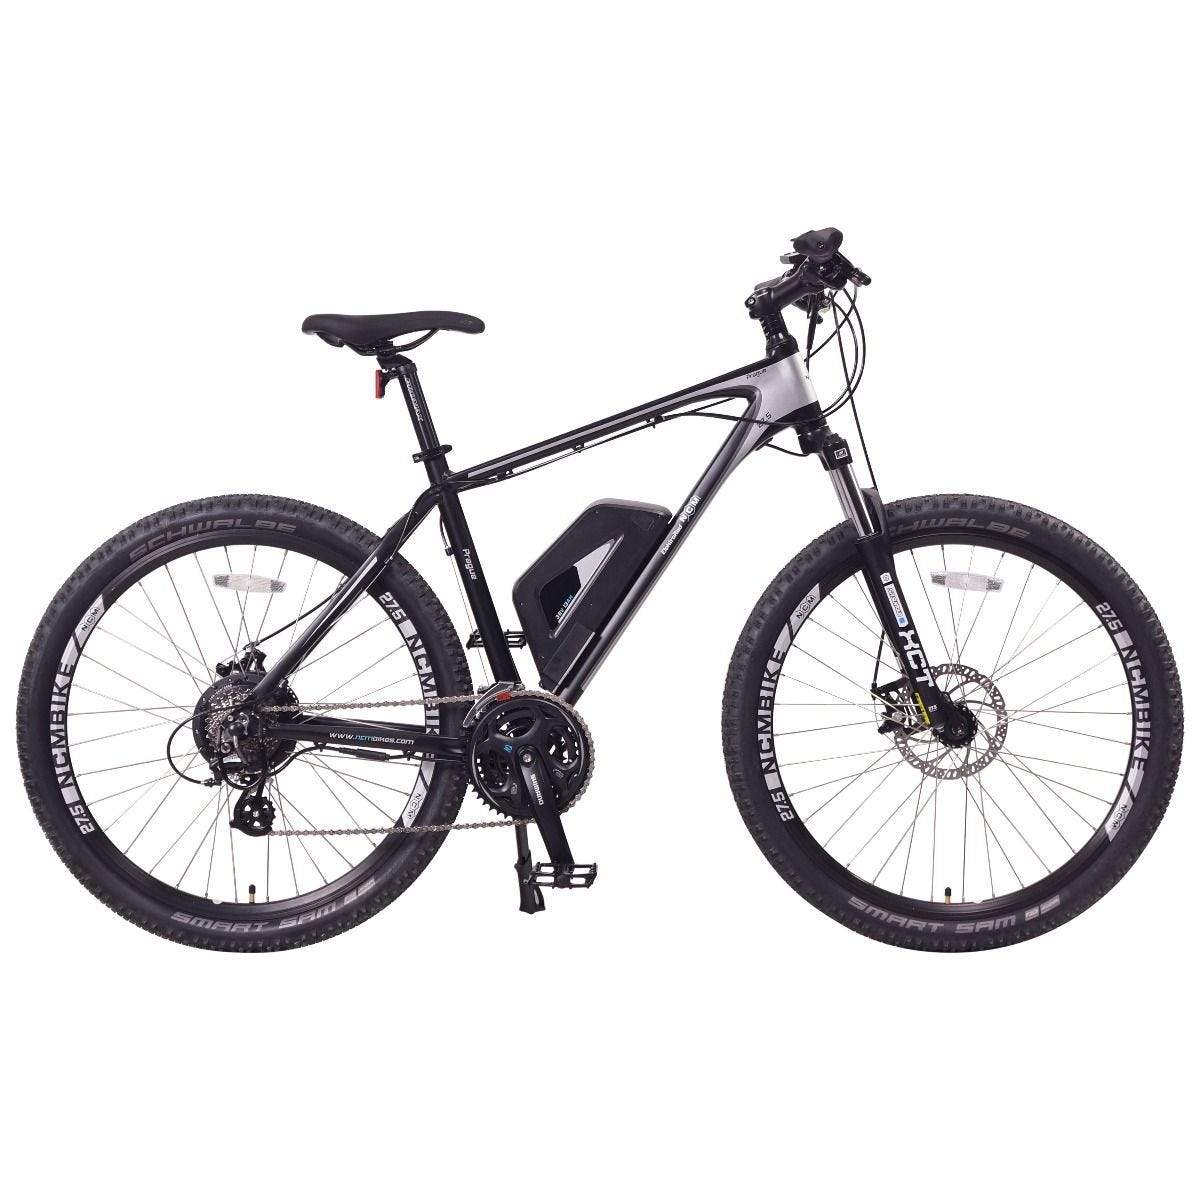 NCM Prague Electric Mountain Bike (Currently Sold Out)